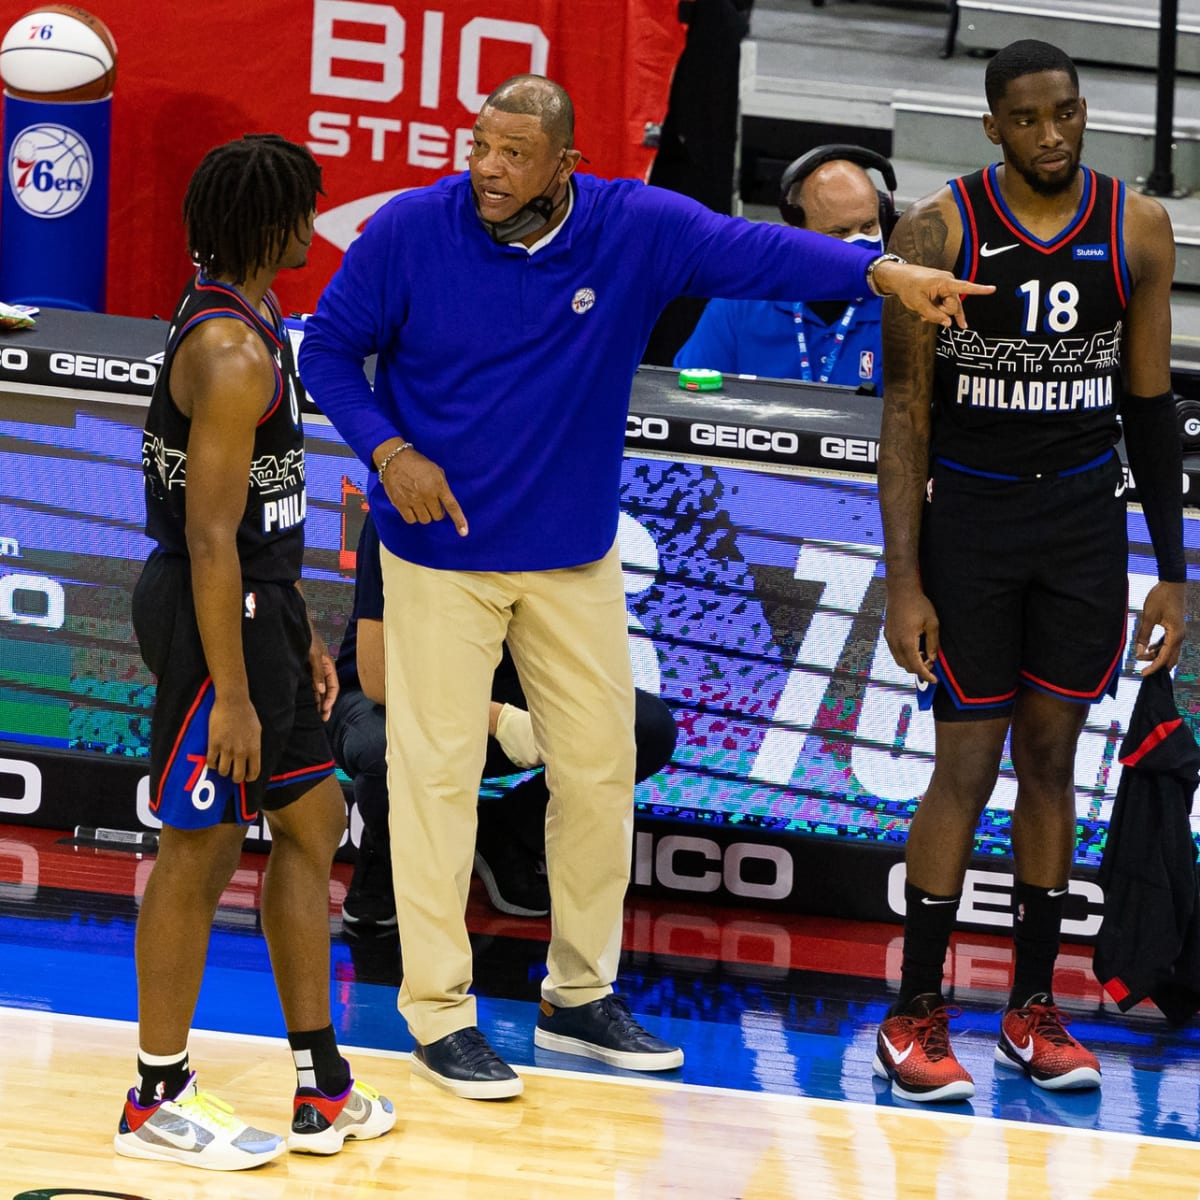 Tyrese Maxey's development gives Sixers a chance to hit highest ceiling